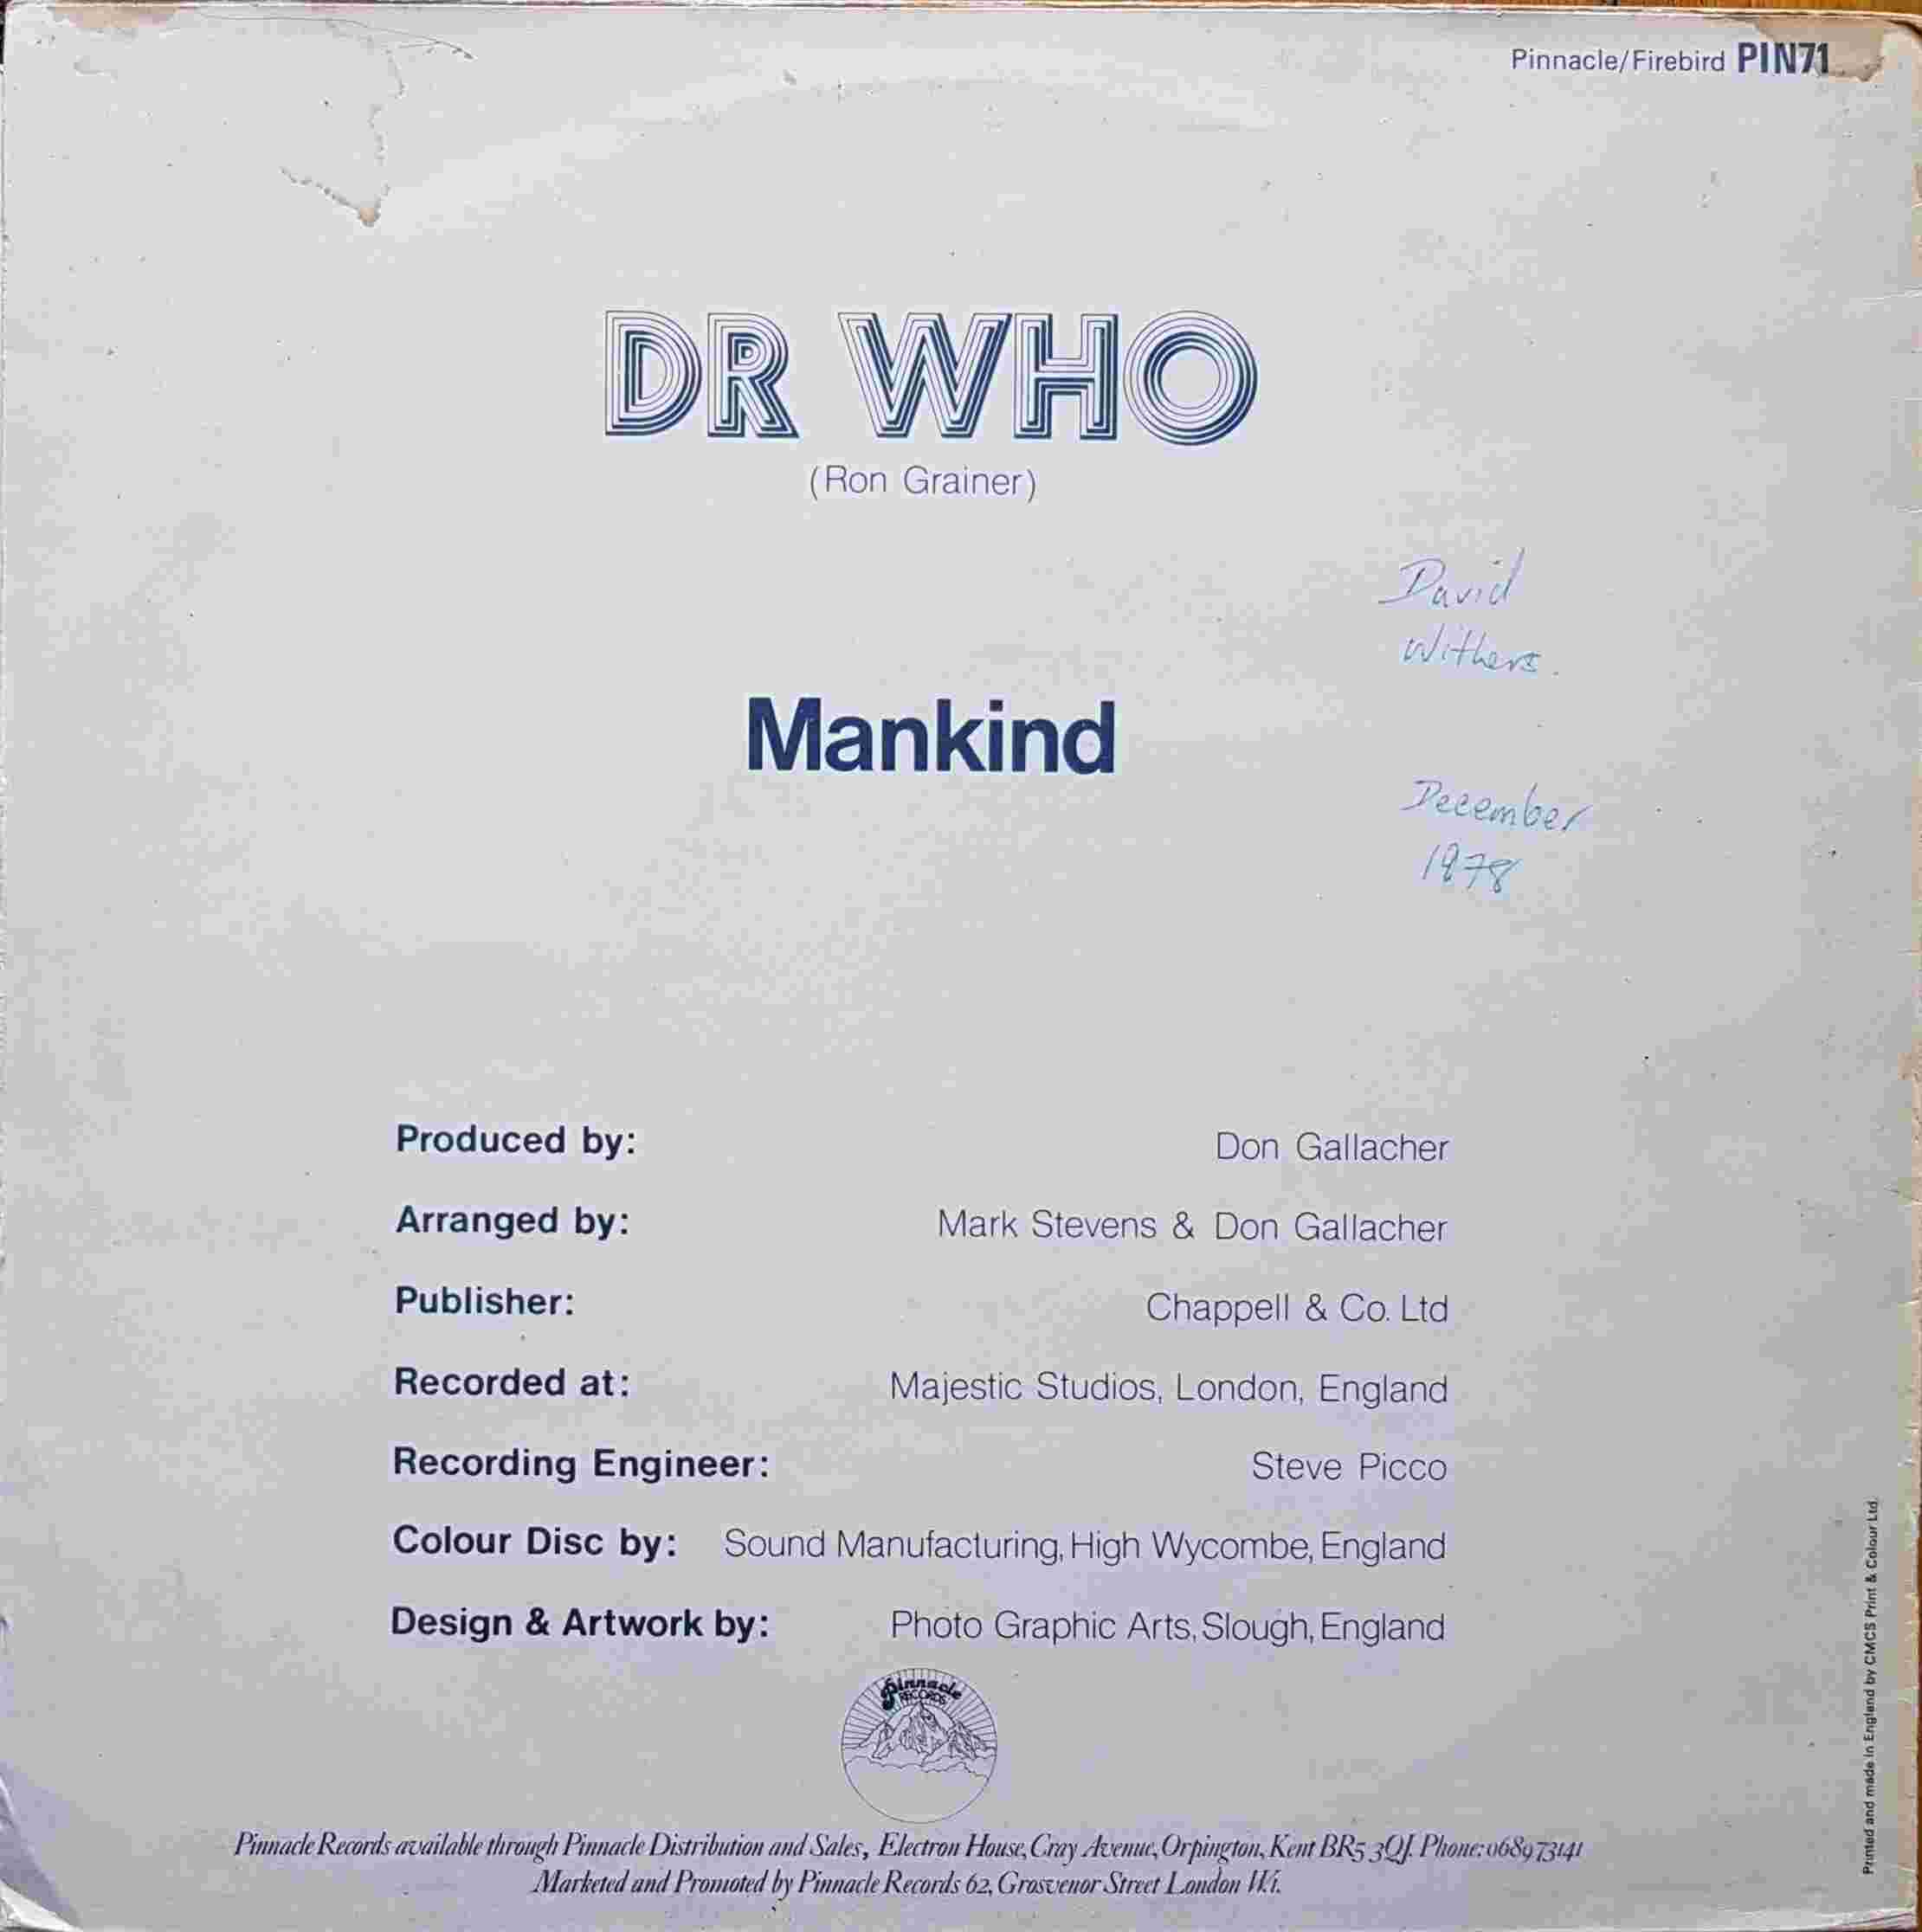 Picture of PIN 71-12 Doctor Who (Cosmic remix) by artist Ron Grainer / Mark Stevens / Mankind from the BBC records and Tapes library